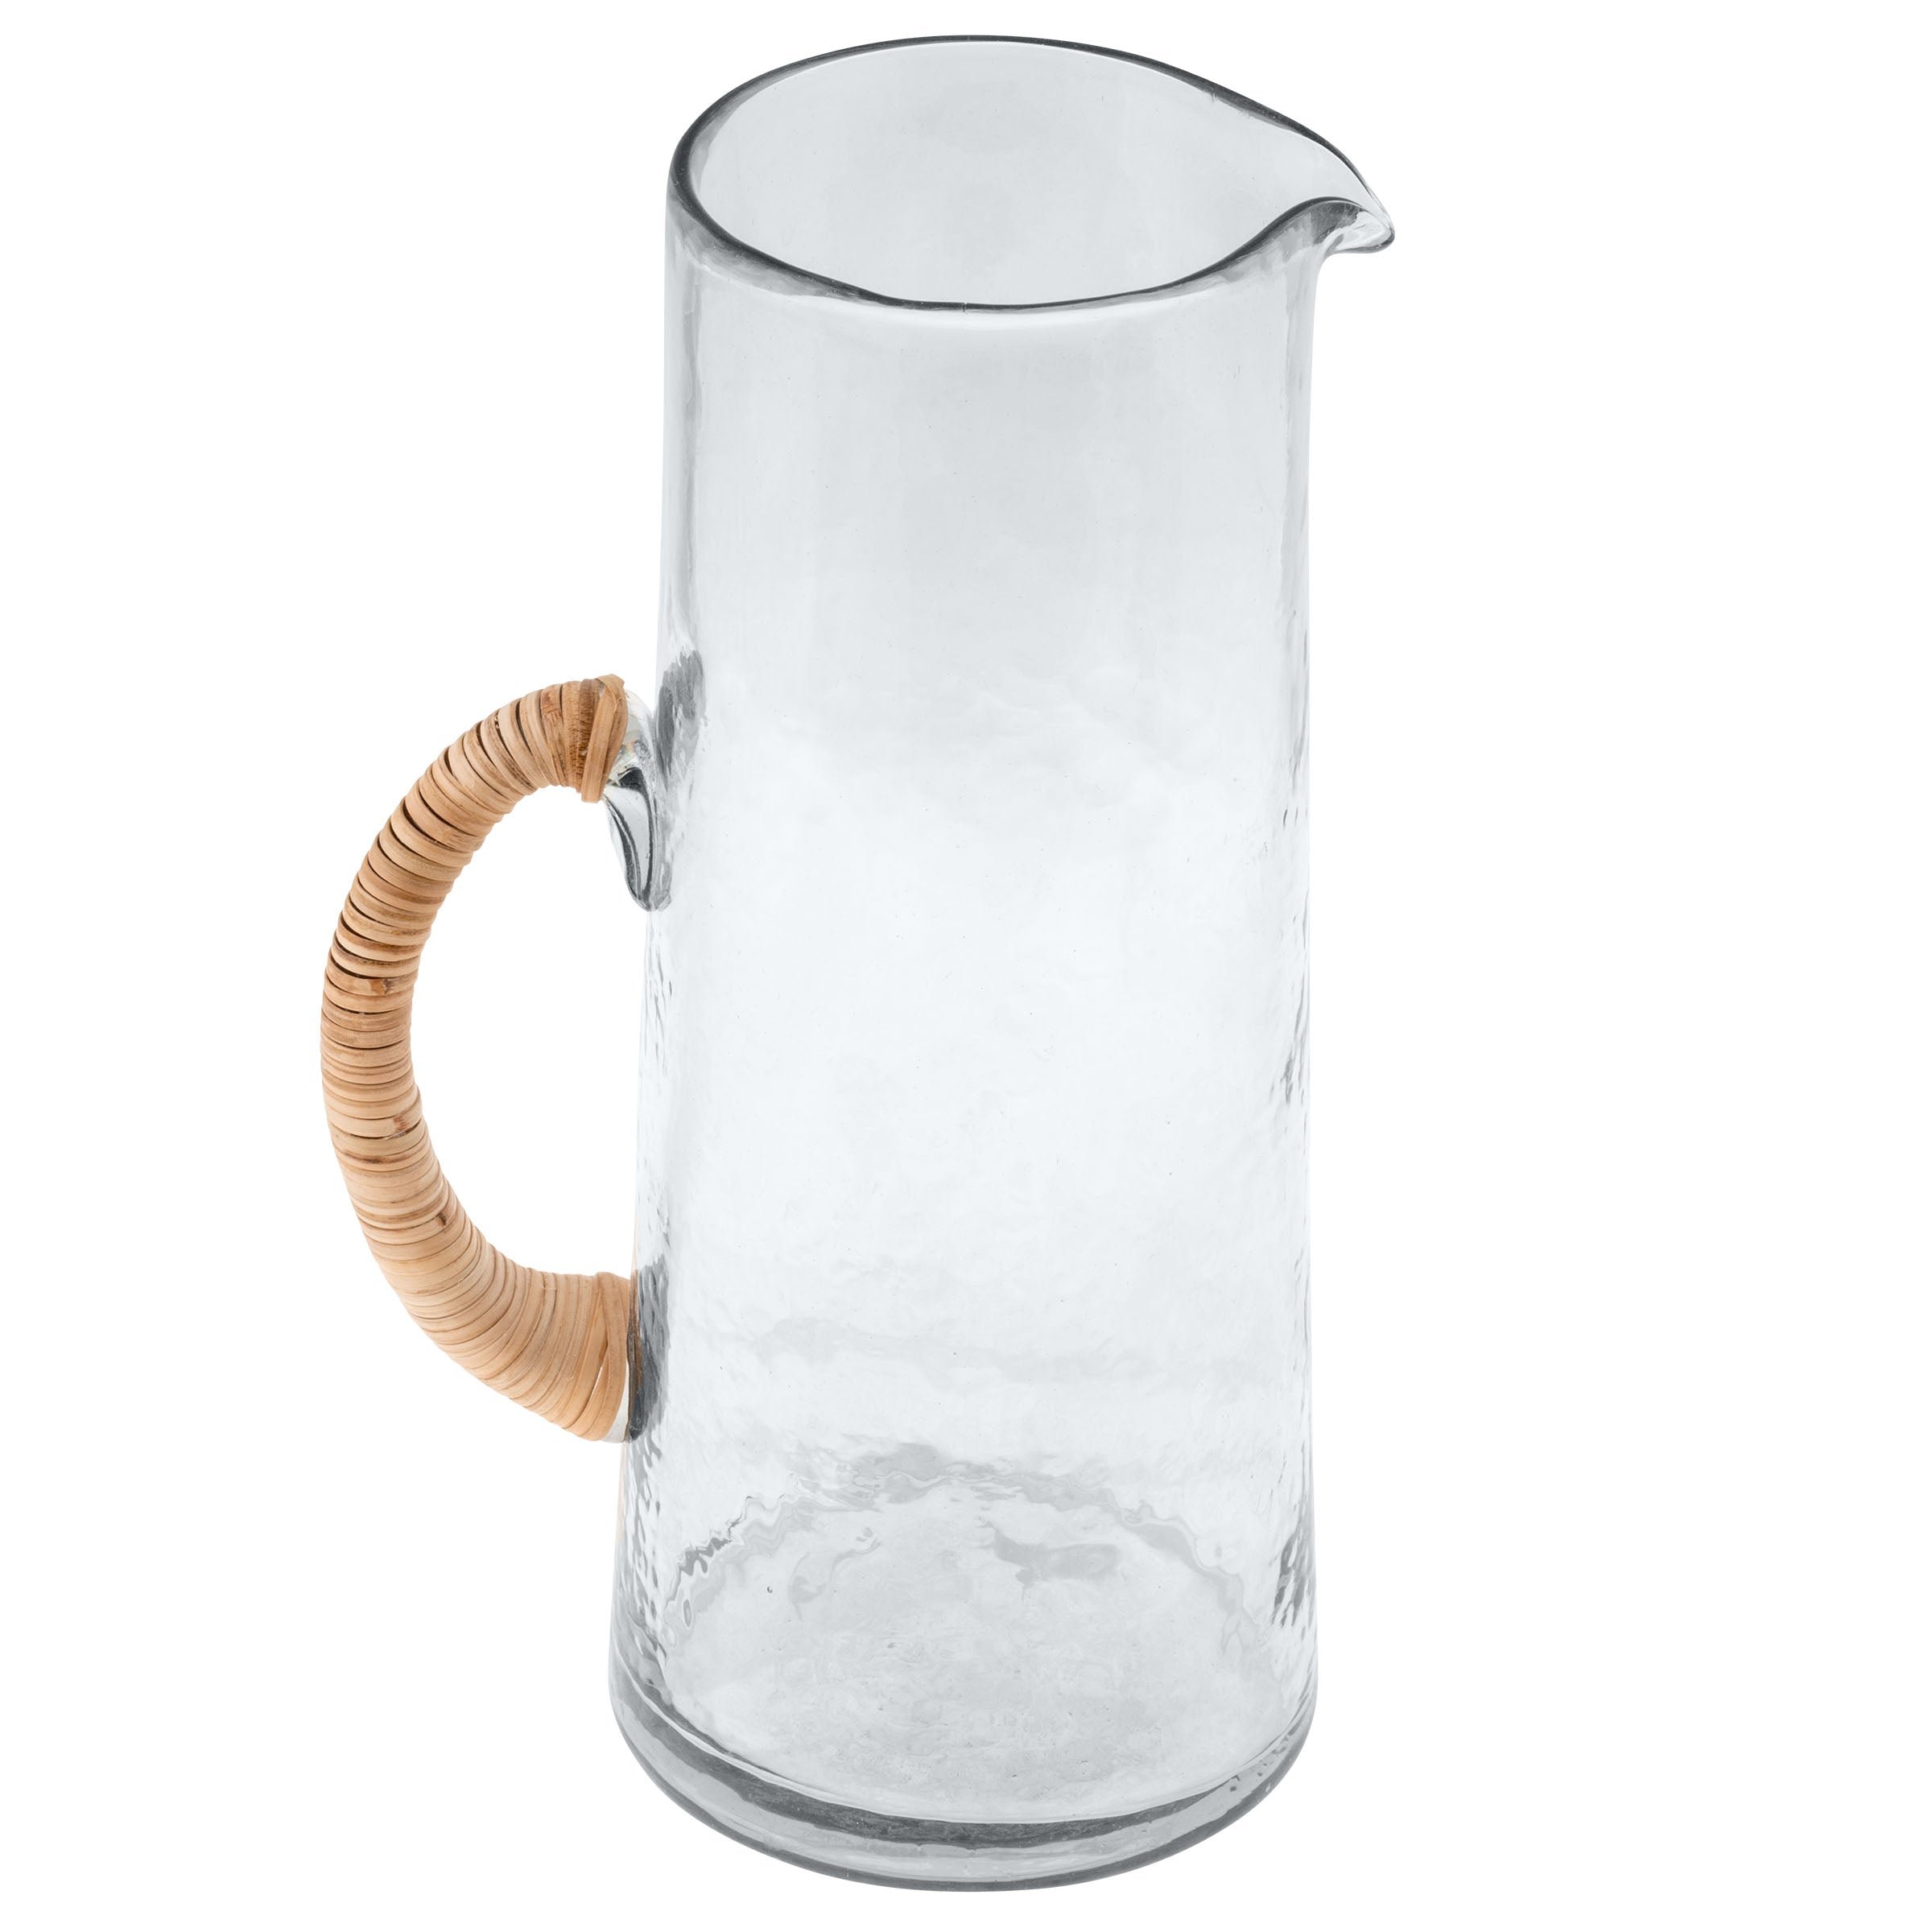 44450 - Catalina Cane Wrapped Pitcher - $64- Purchased